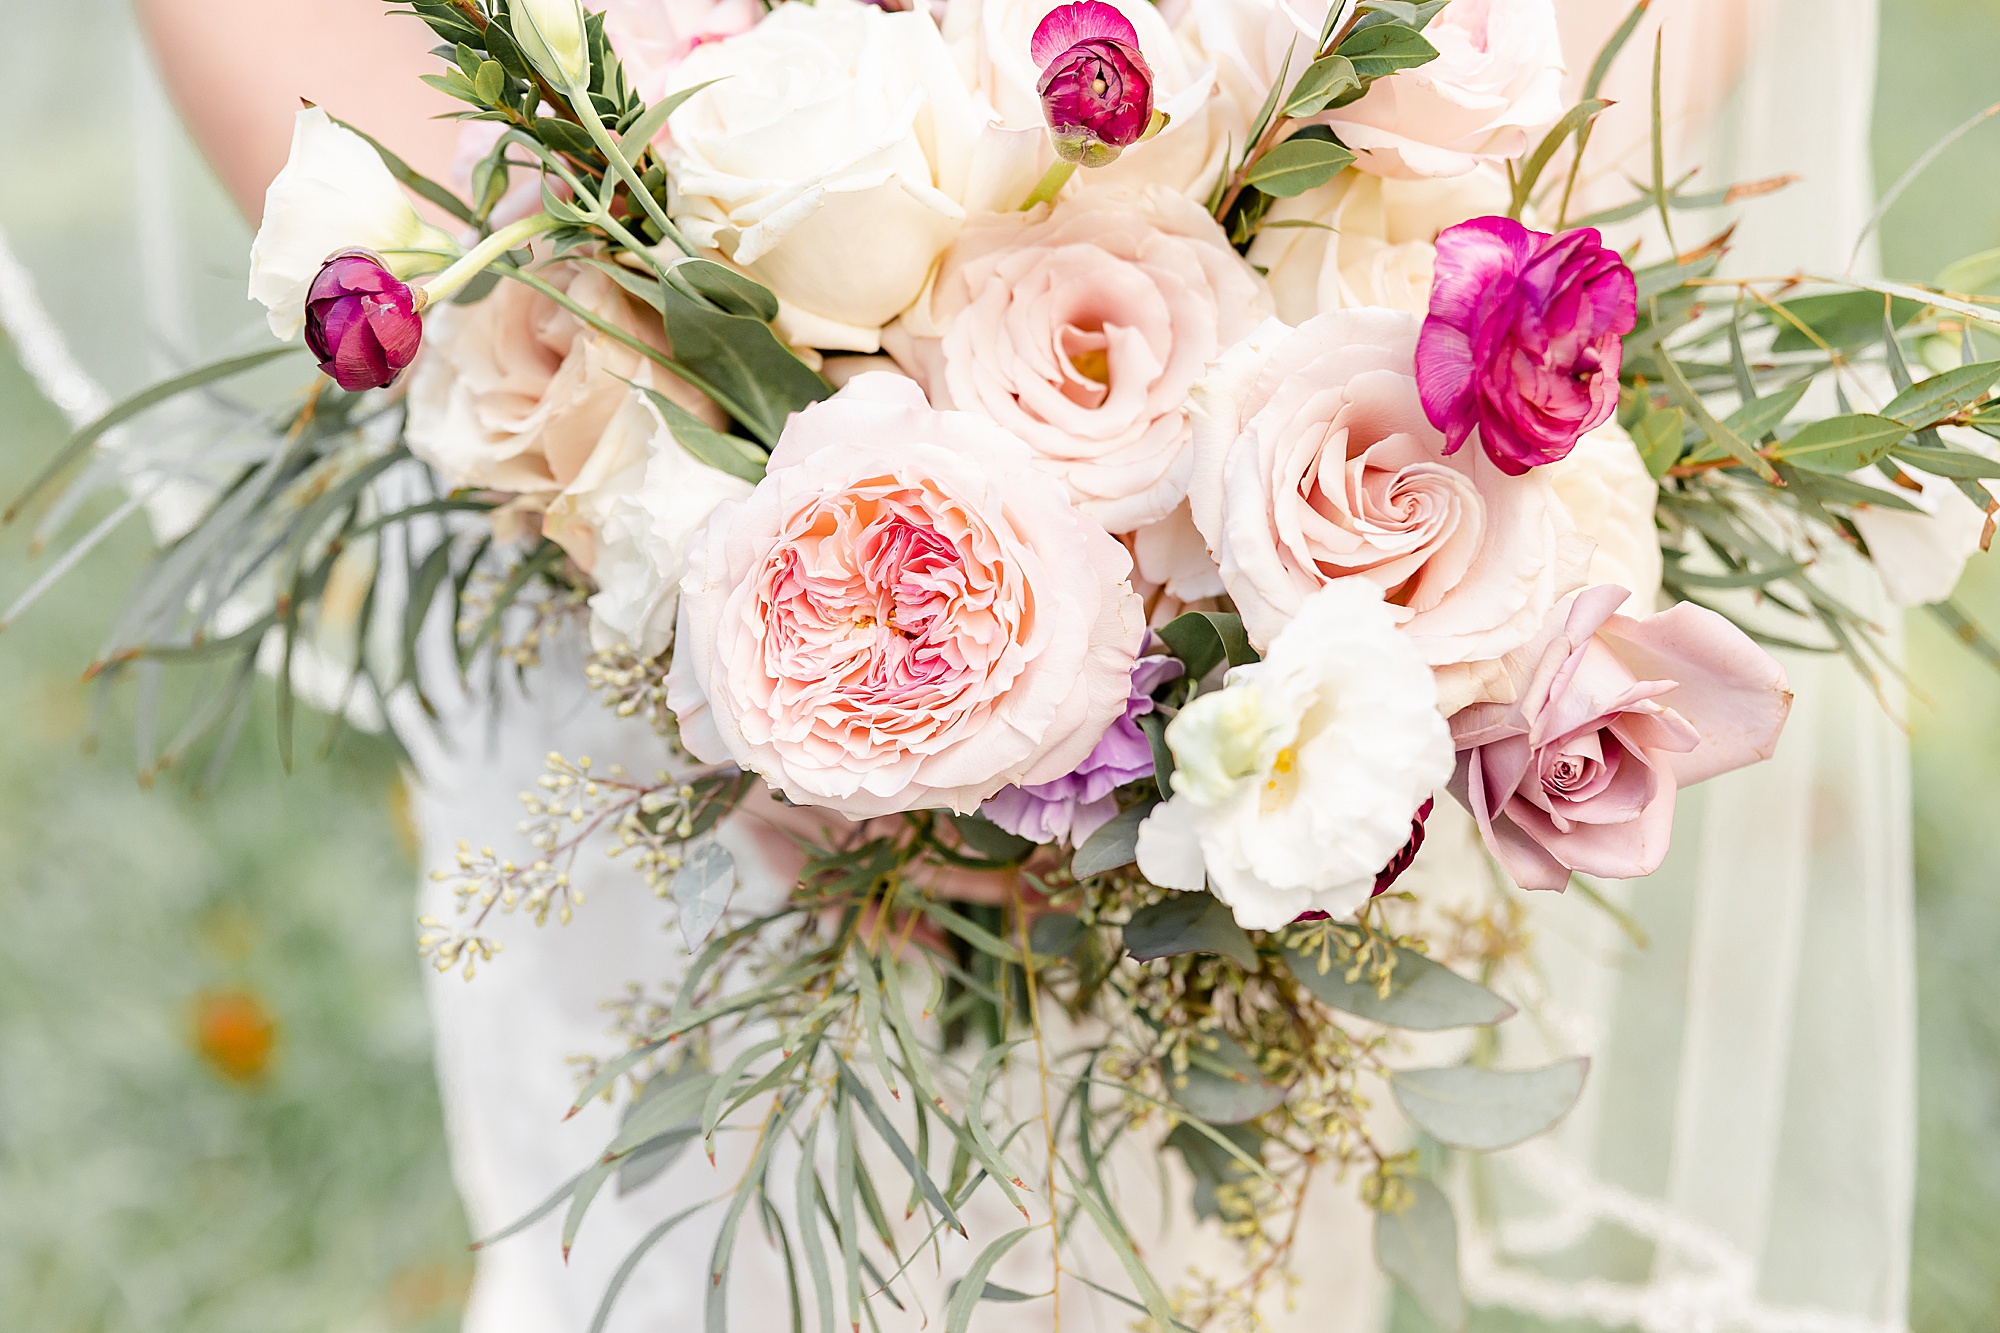 bride's pink fall bouquet for wedding day at the Biltmore Estate